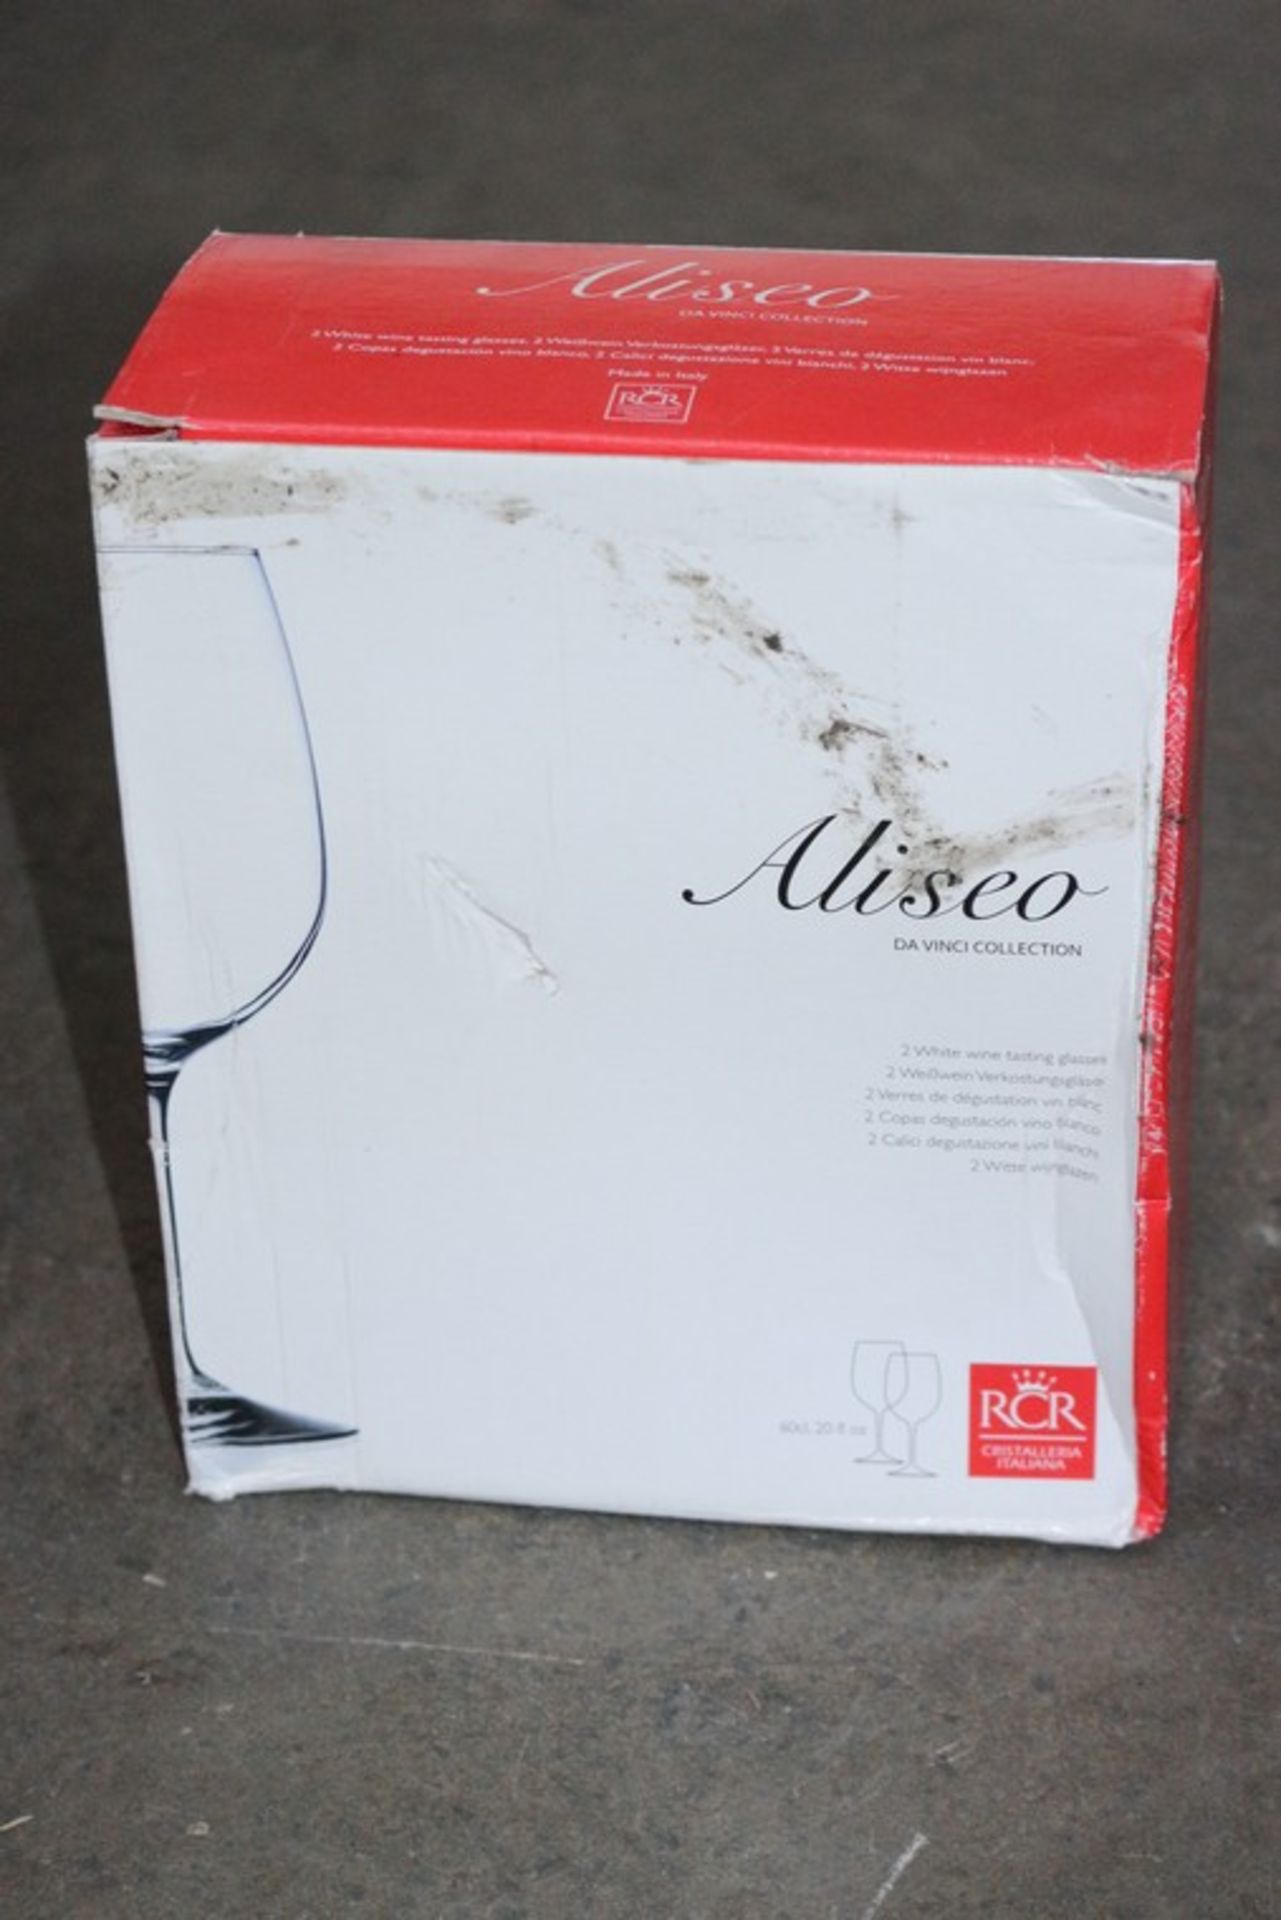 4 x BOXED PACKS OF ALISEO DAVINCI COLLECTION RCR WINE GLASSES *PLEASE NOTE THAT THE BID PRICE IS